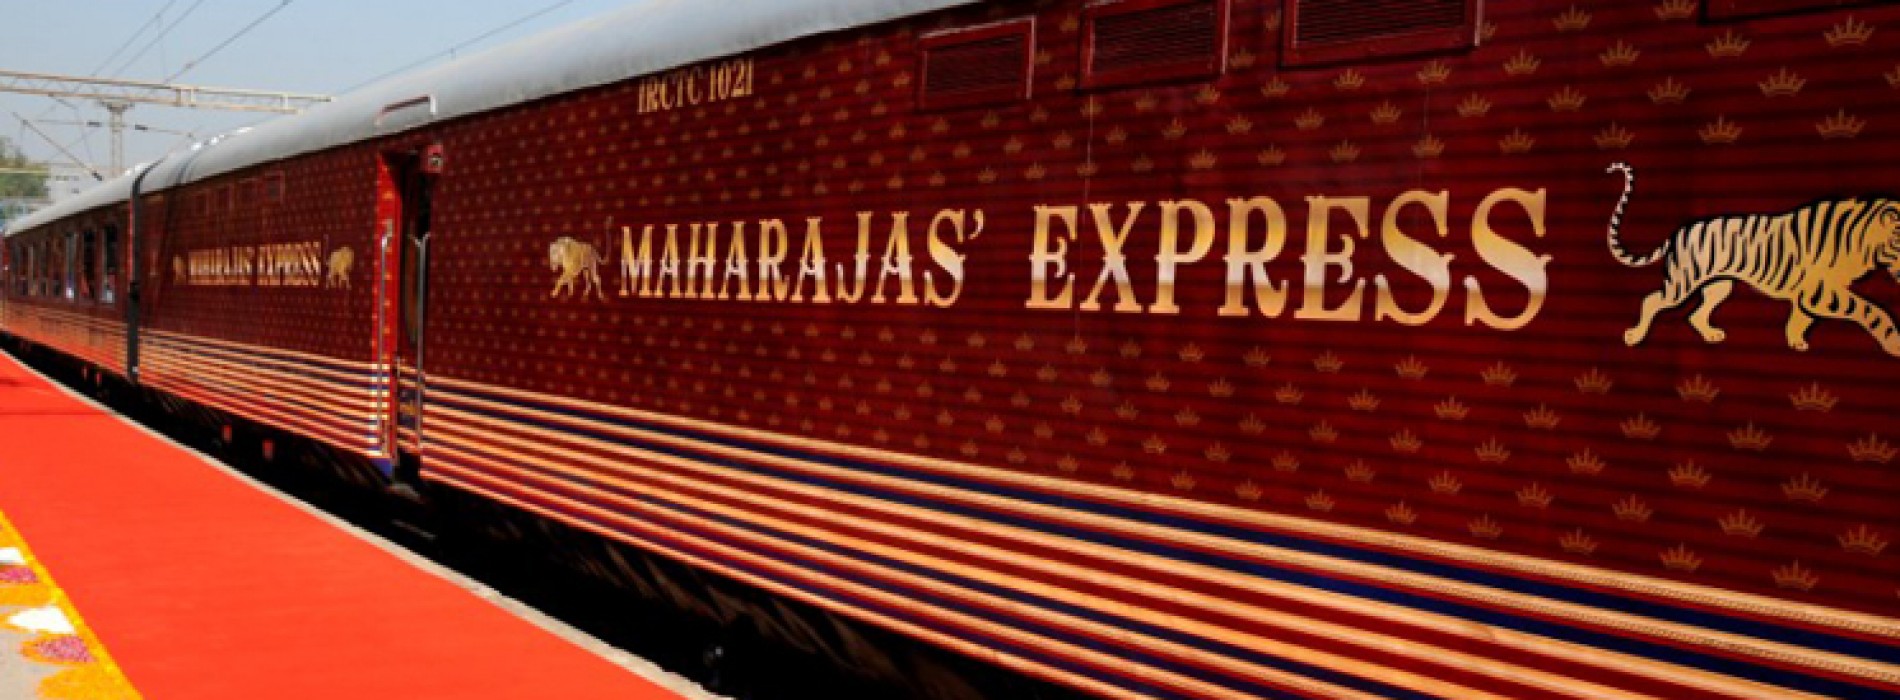 Maharajas’ Express flagged off for new tourist season